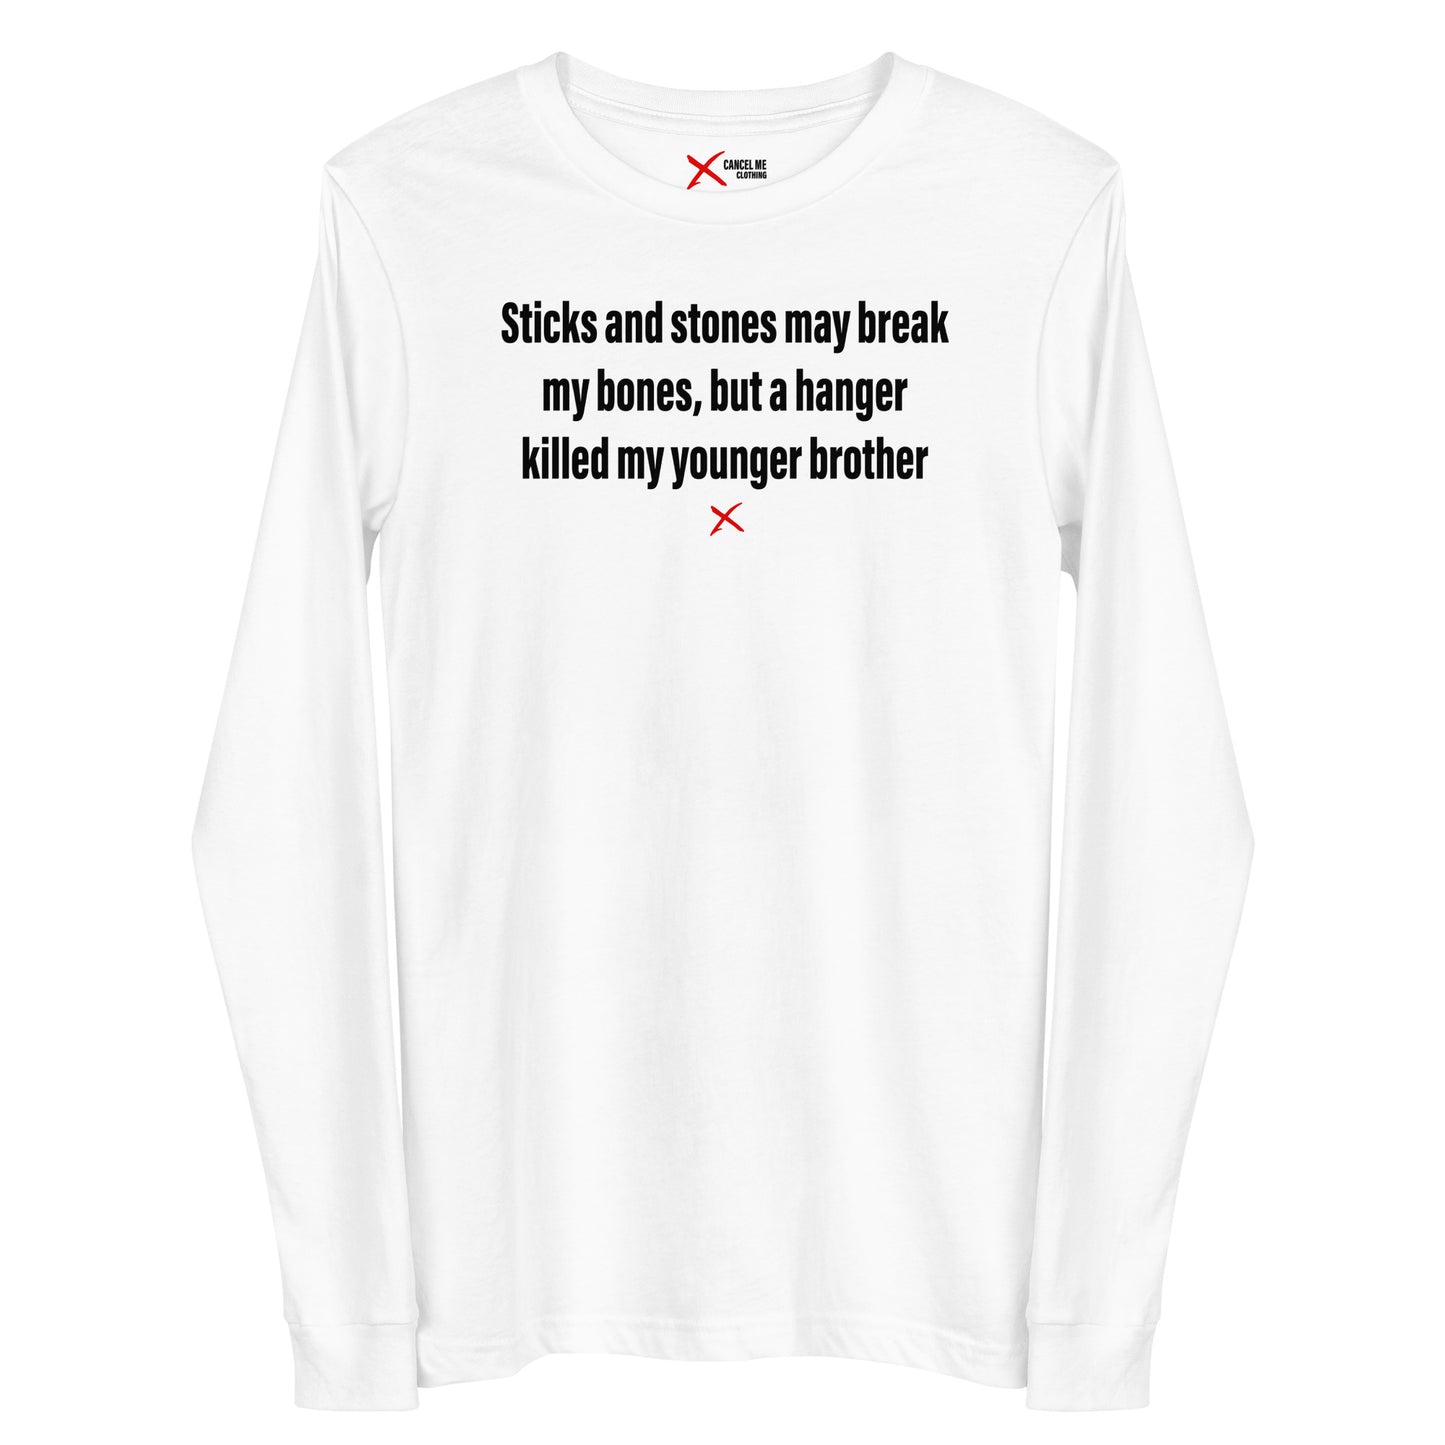 Sticks and stones may break my bones, but a hanger killed my younger brother - Longsleeve